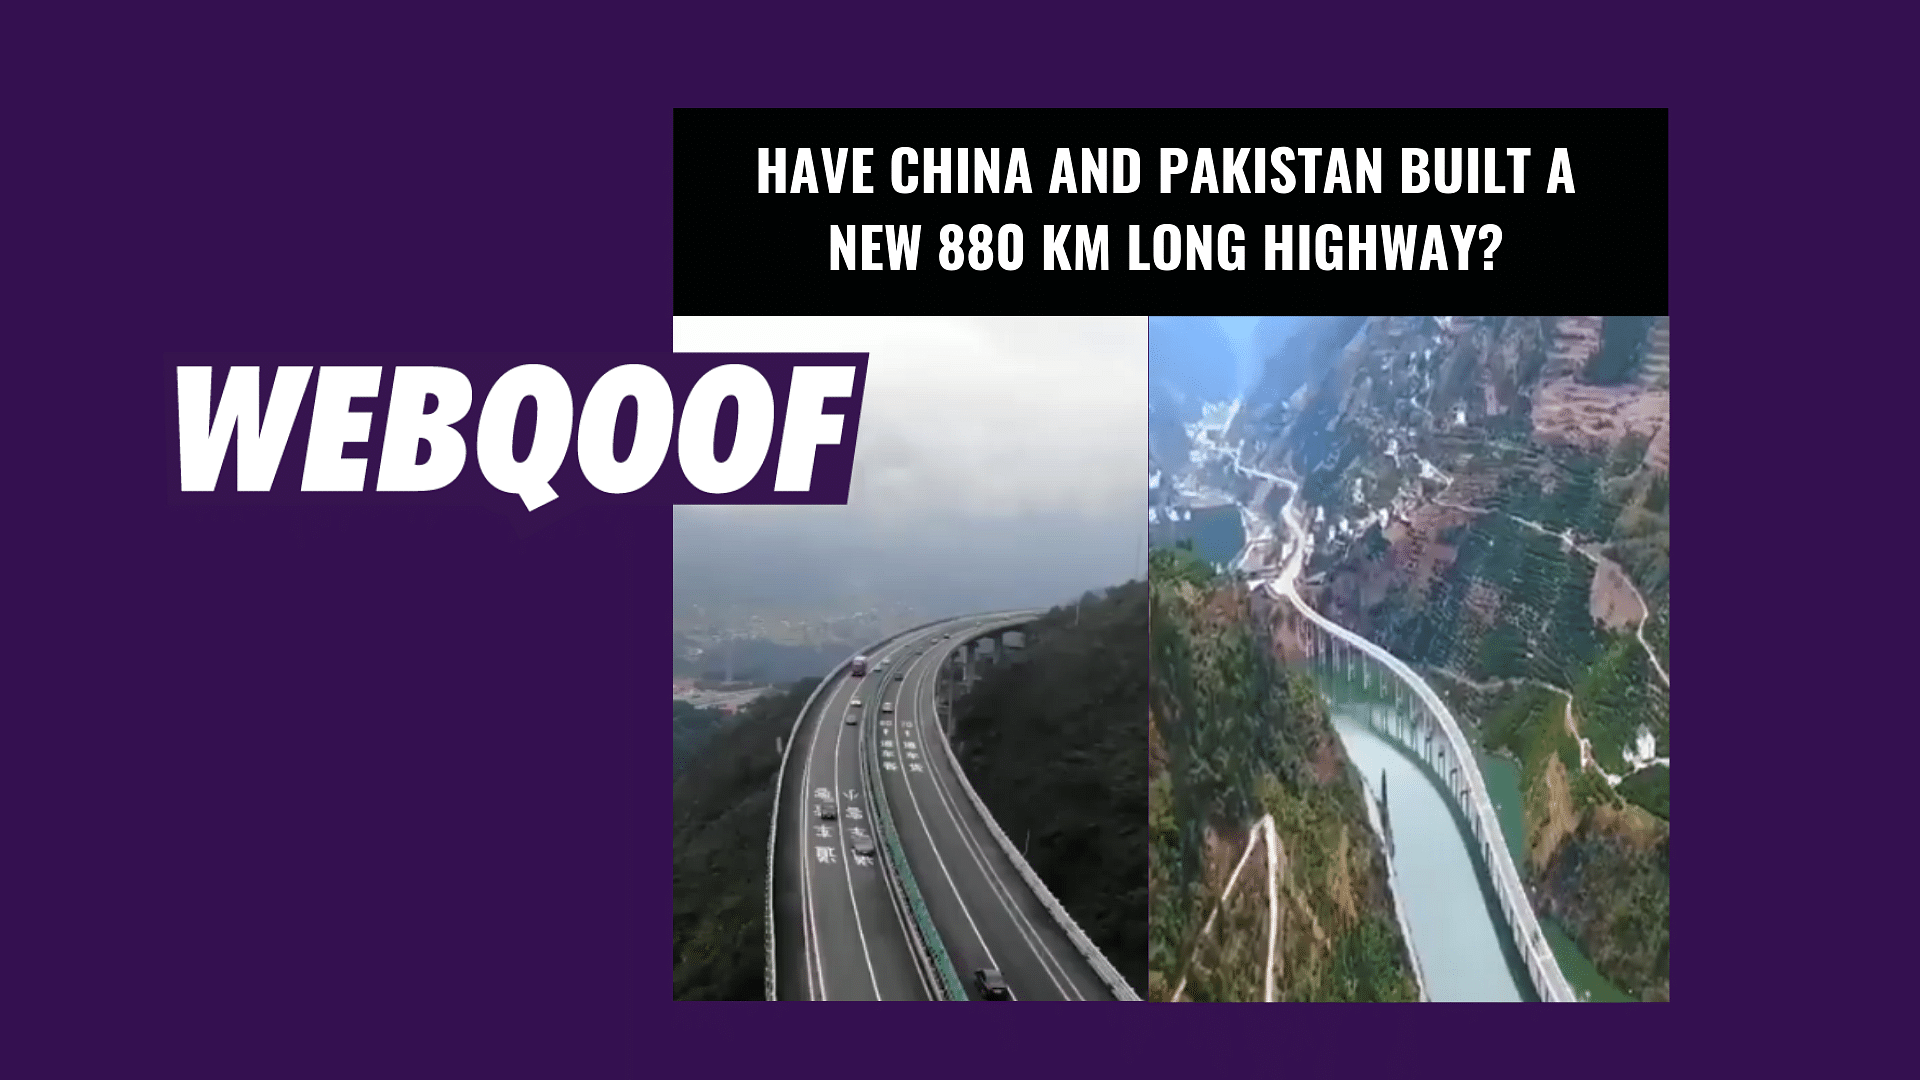 A viral video falsely claimed that a 880 km long highway has been built between China and Pakistan.